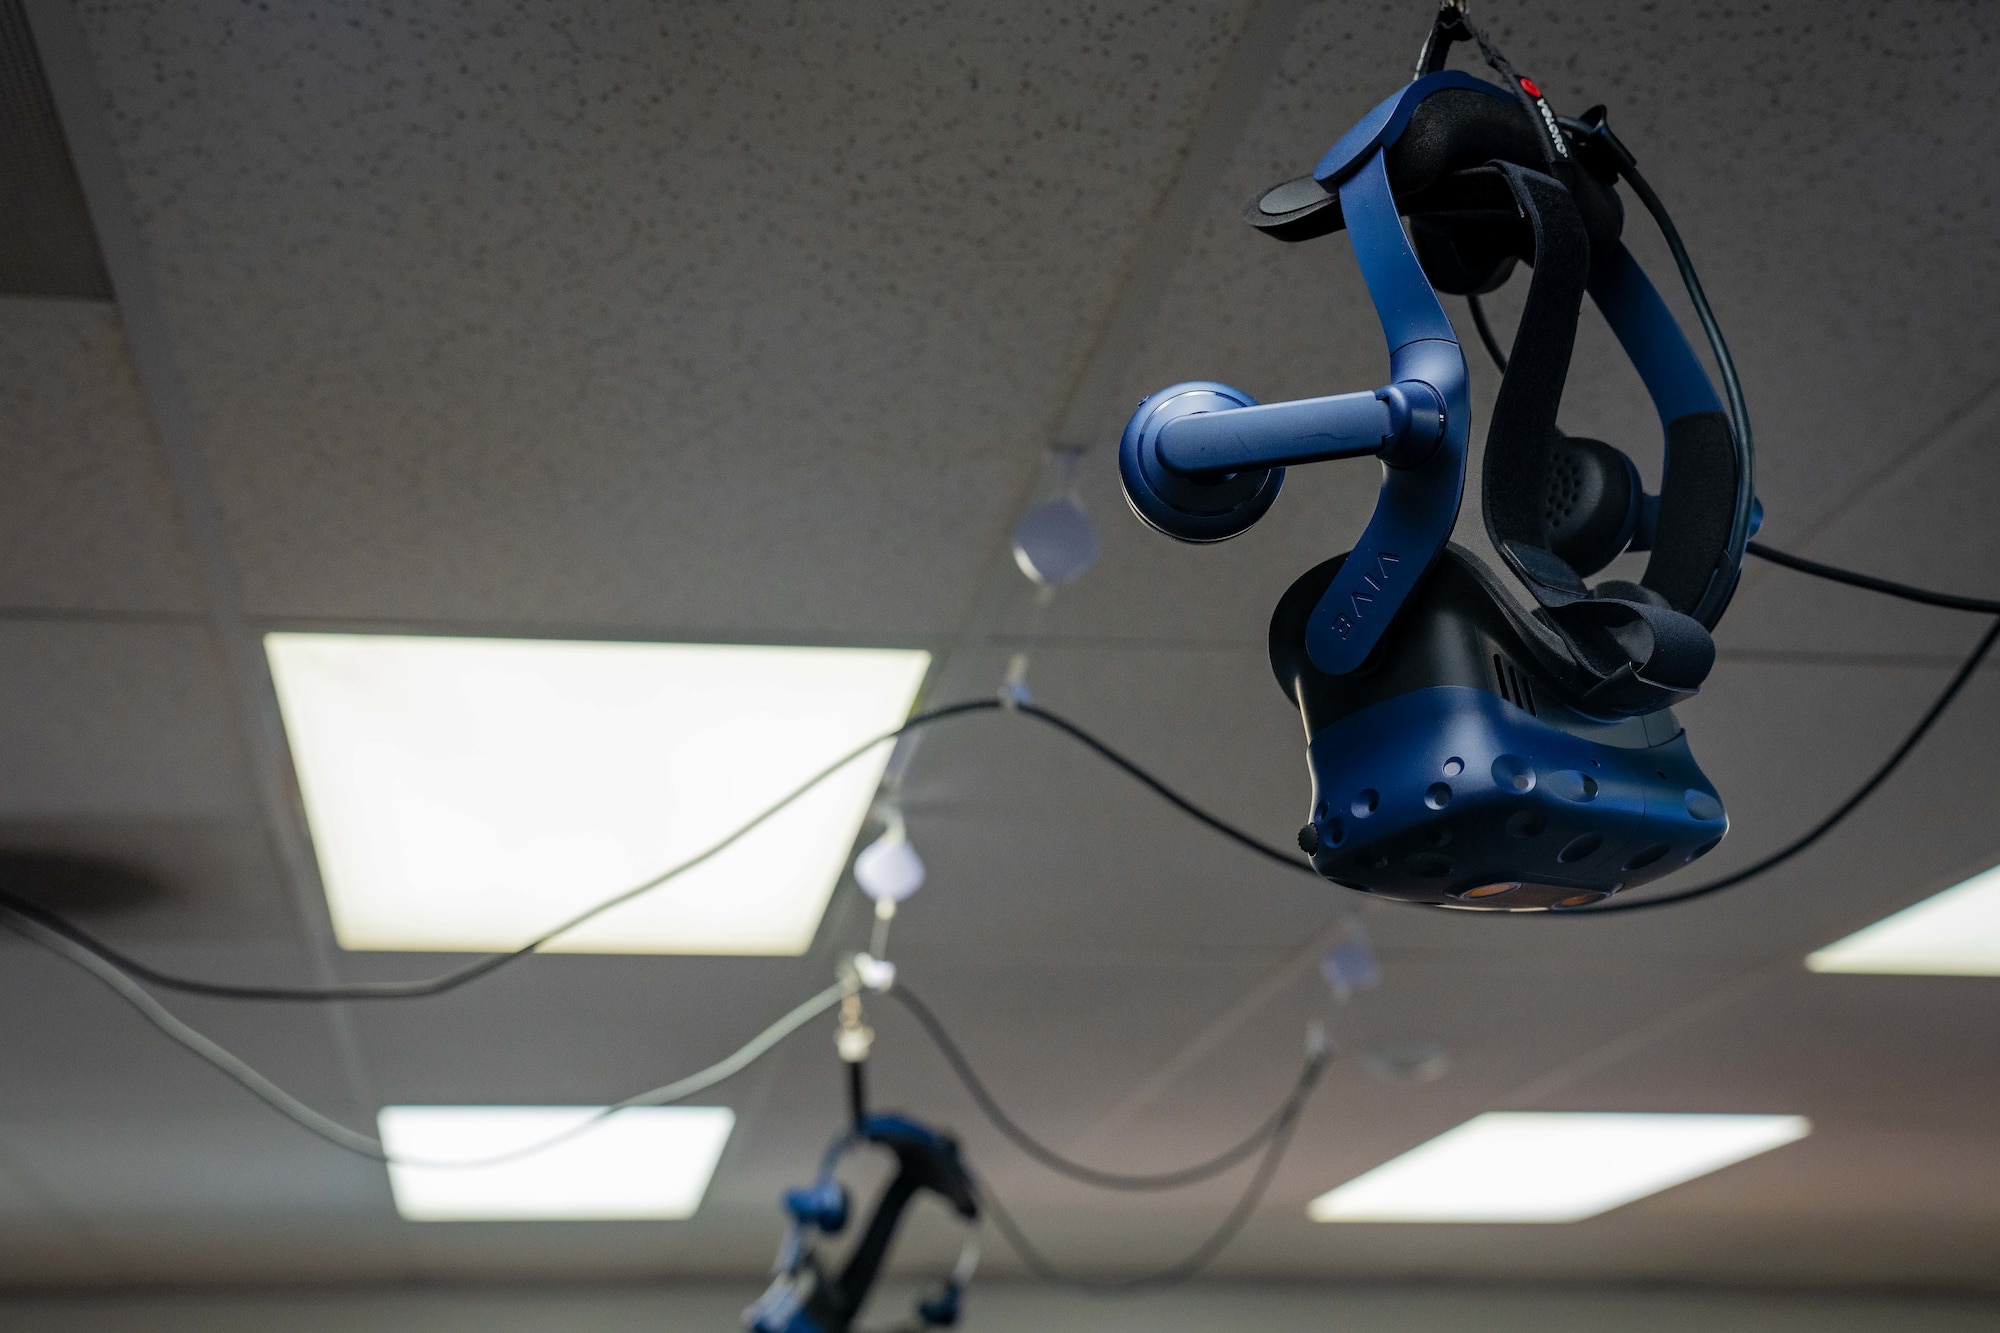 A virtual reality headset hanging from the ceiling.